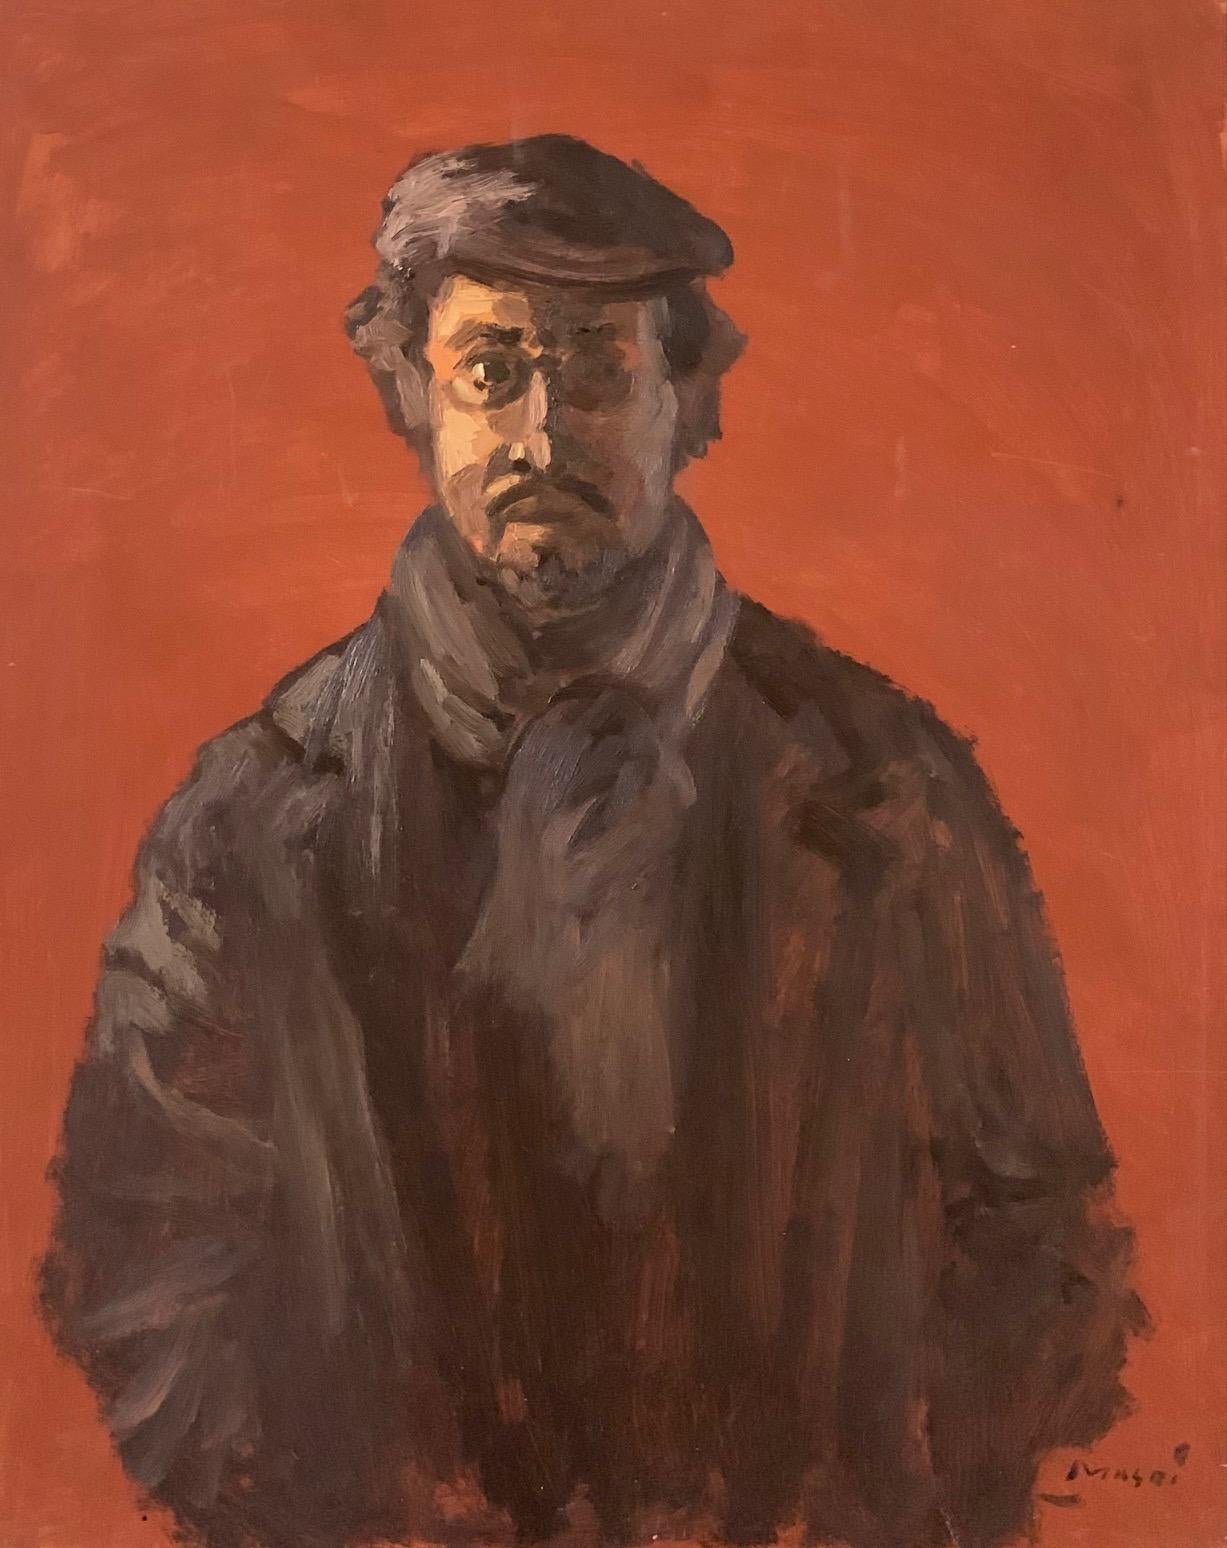 "Self Portrait on red background" Oil on board 20" x 16" by Masri